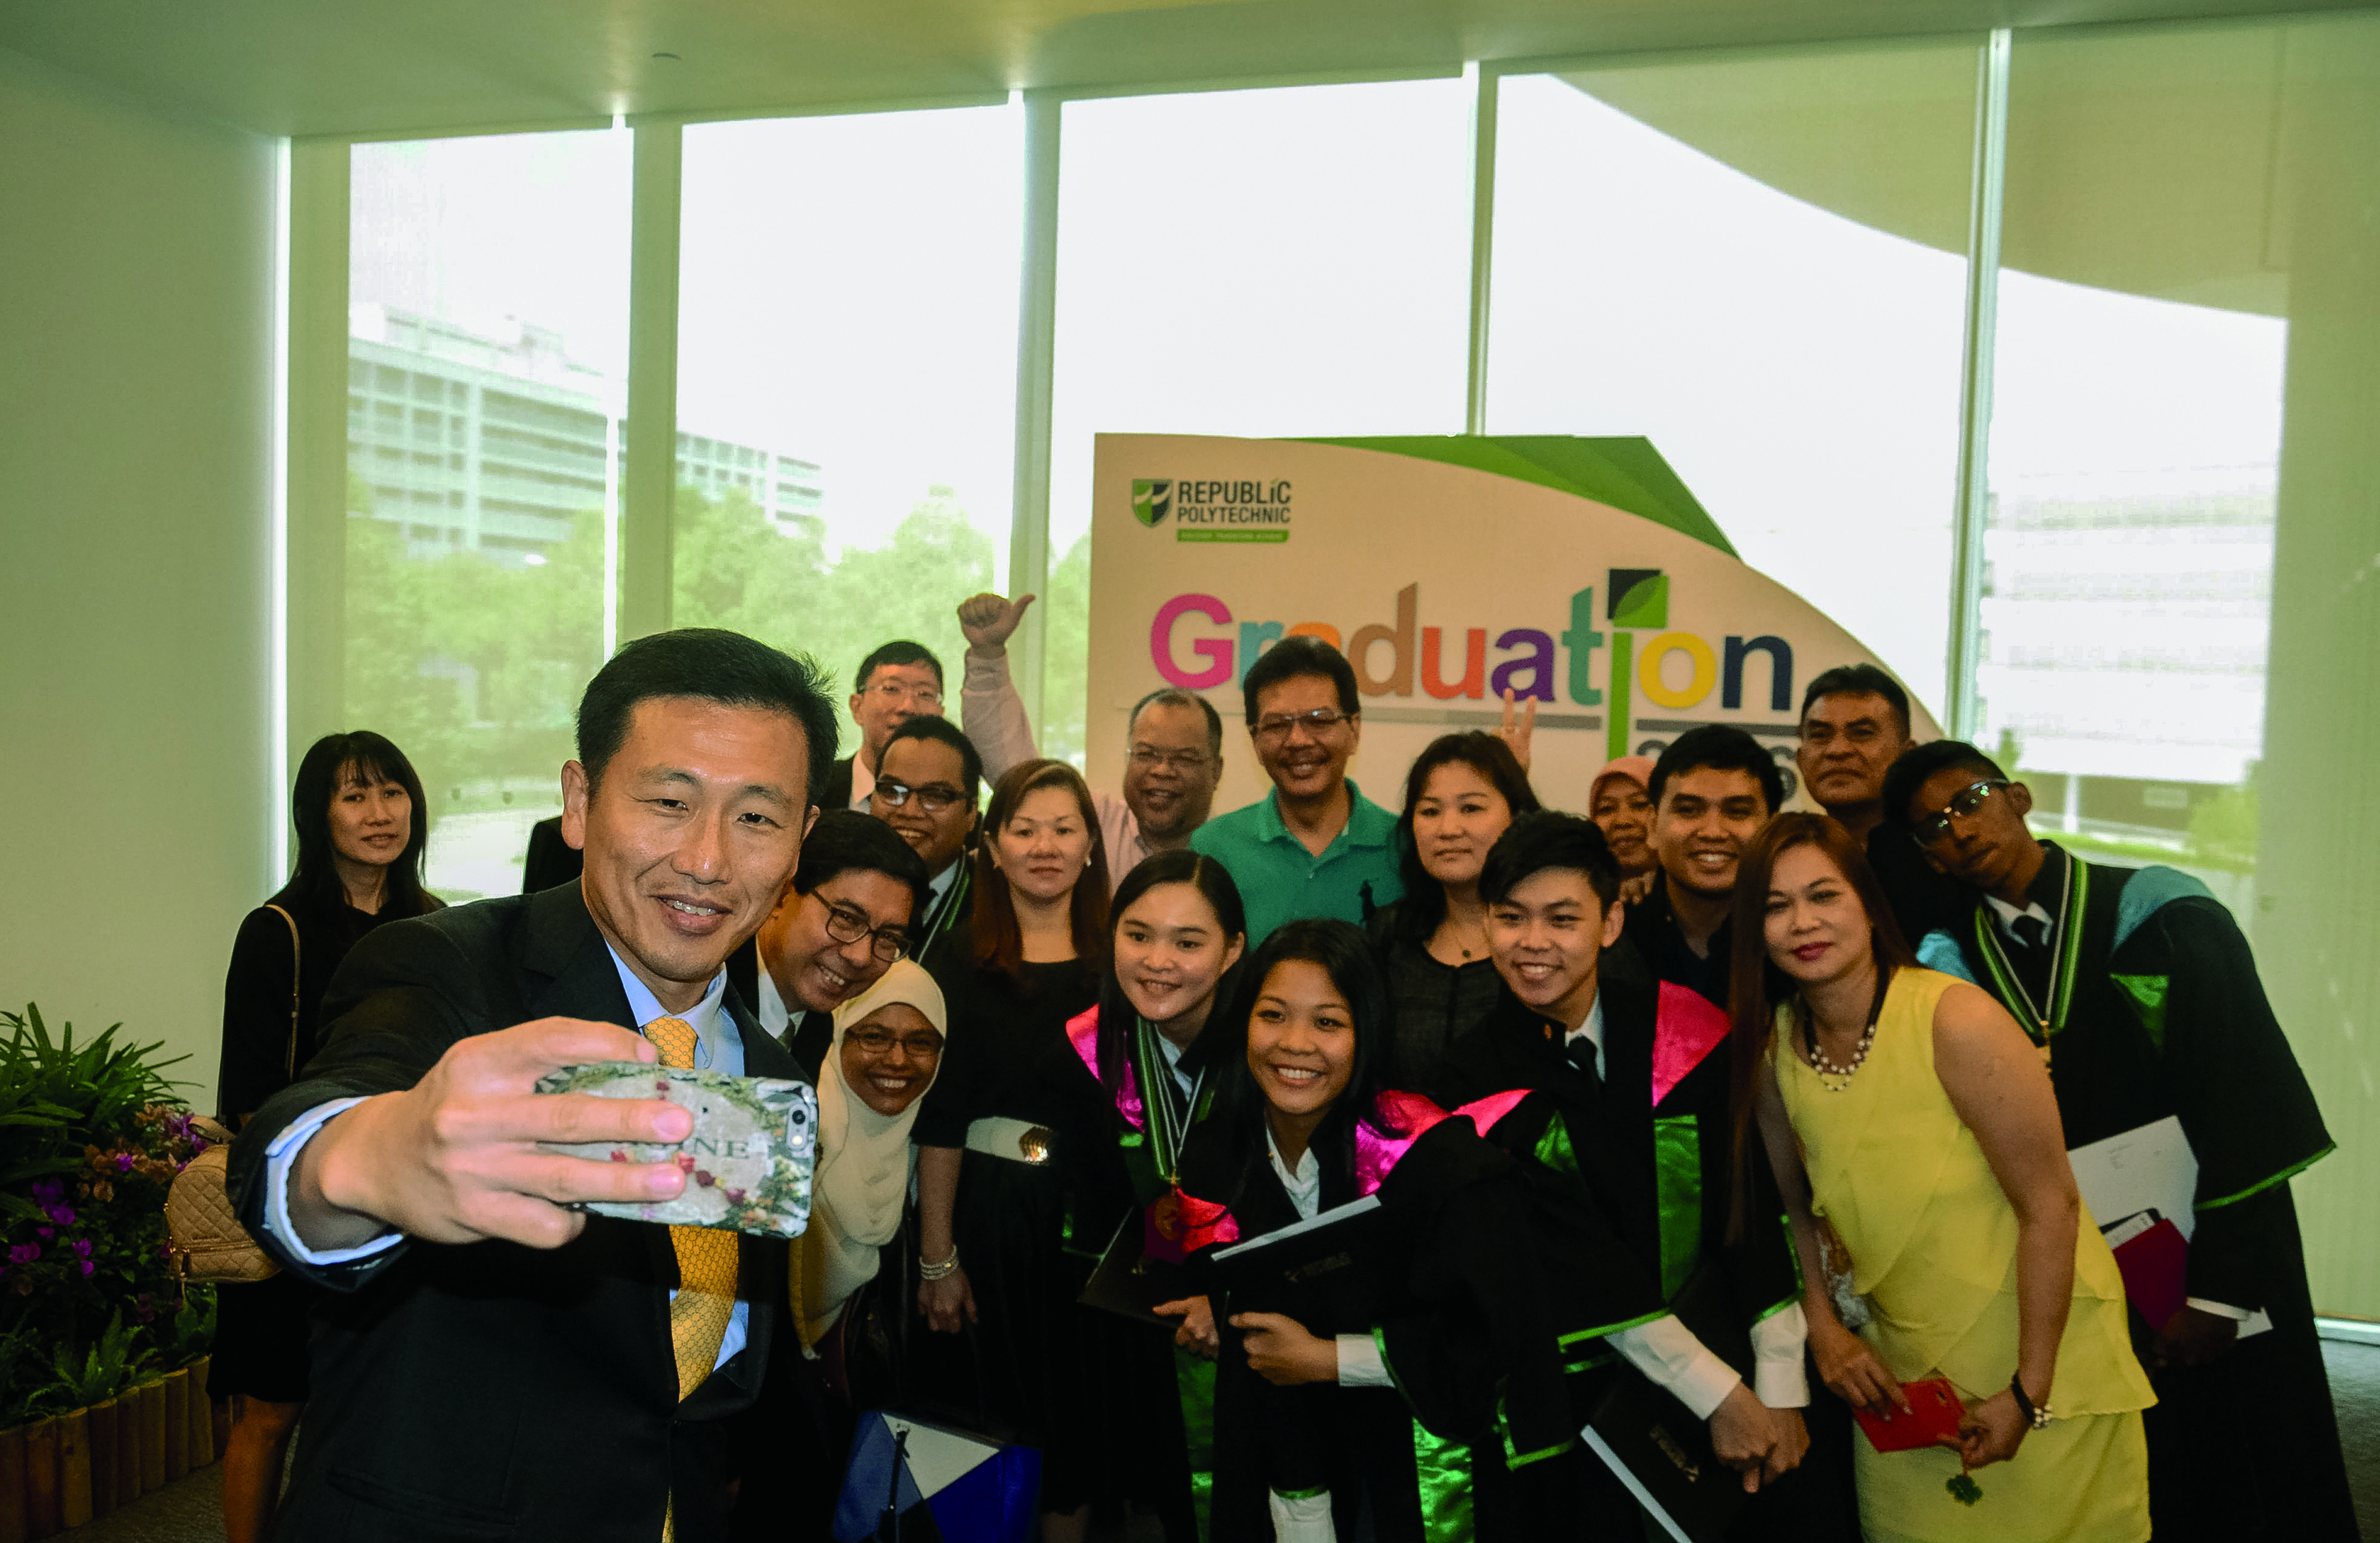 CELEBRITY SELFIE: Acting Minister of Education Mr Ong Ye Kung, takes a selfie with the gold medalists of this year’s 2016 graduating cohort together with their parents, and Principal Mr Yeo Li Pheow. These students have excelled in their respective diplomas and made their mark as the top graduating students of this cohort. (PHOTO BY: SYED SHAFFIQ)